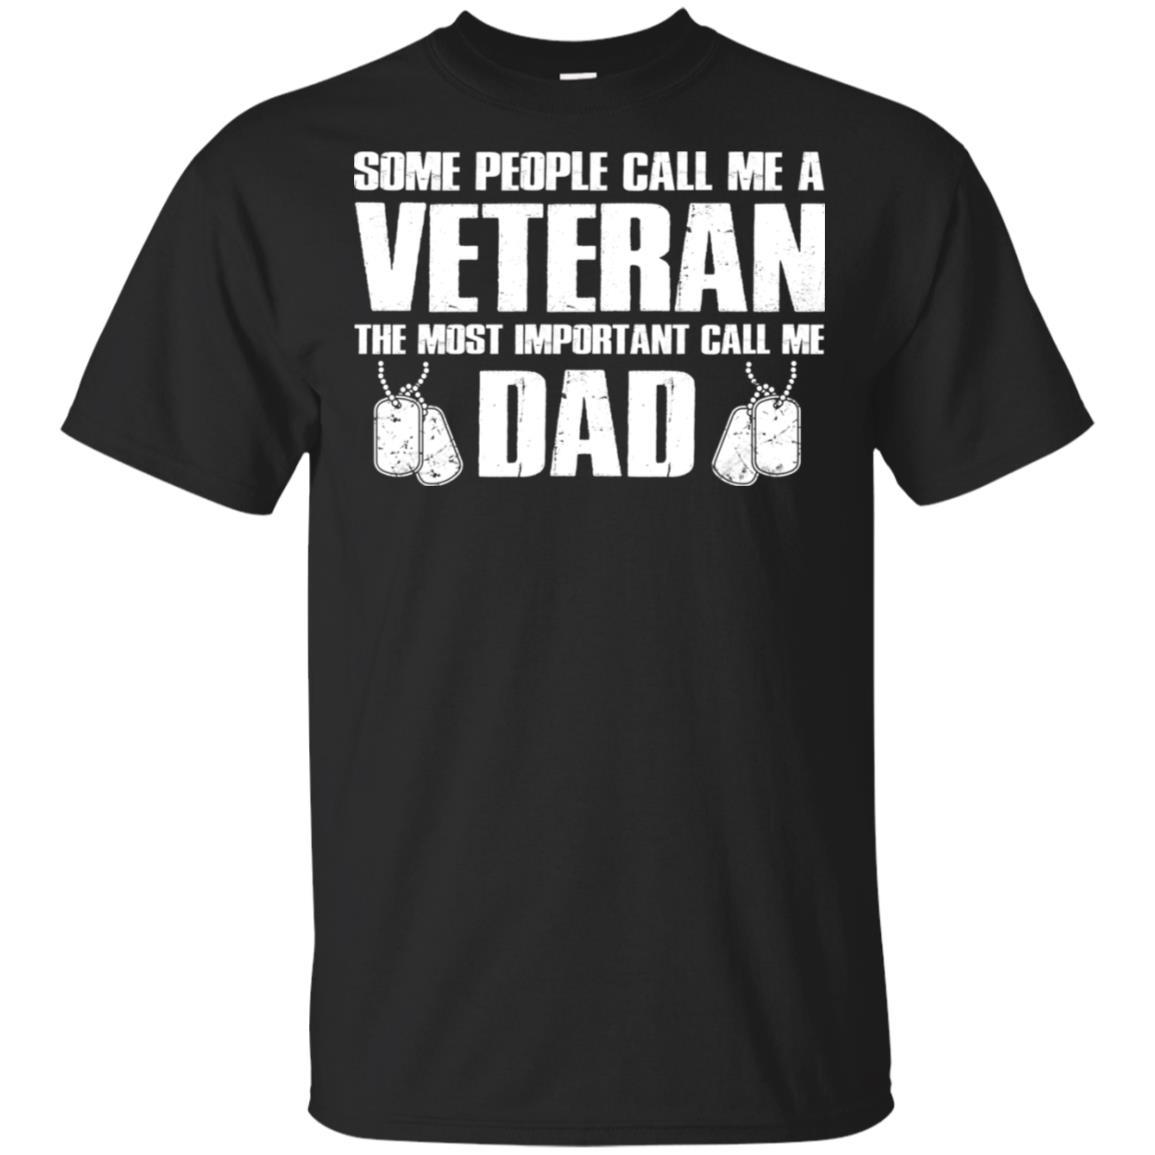 Military T-Shirt "Some People Call Me A Veteran The Most Inportant Call Me Dad On" Front-TShirt-General-Veterans Nation